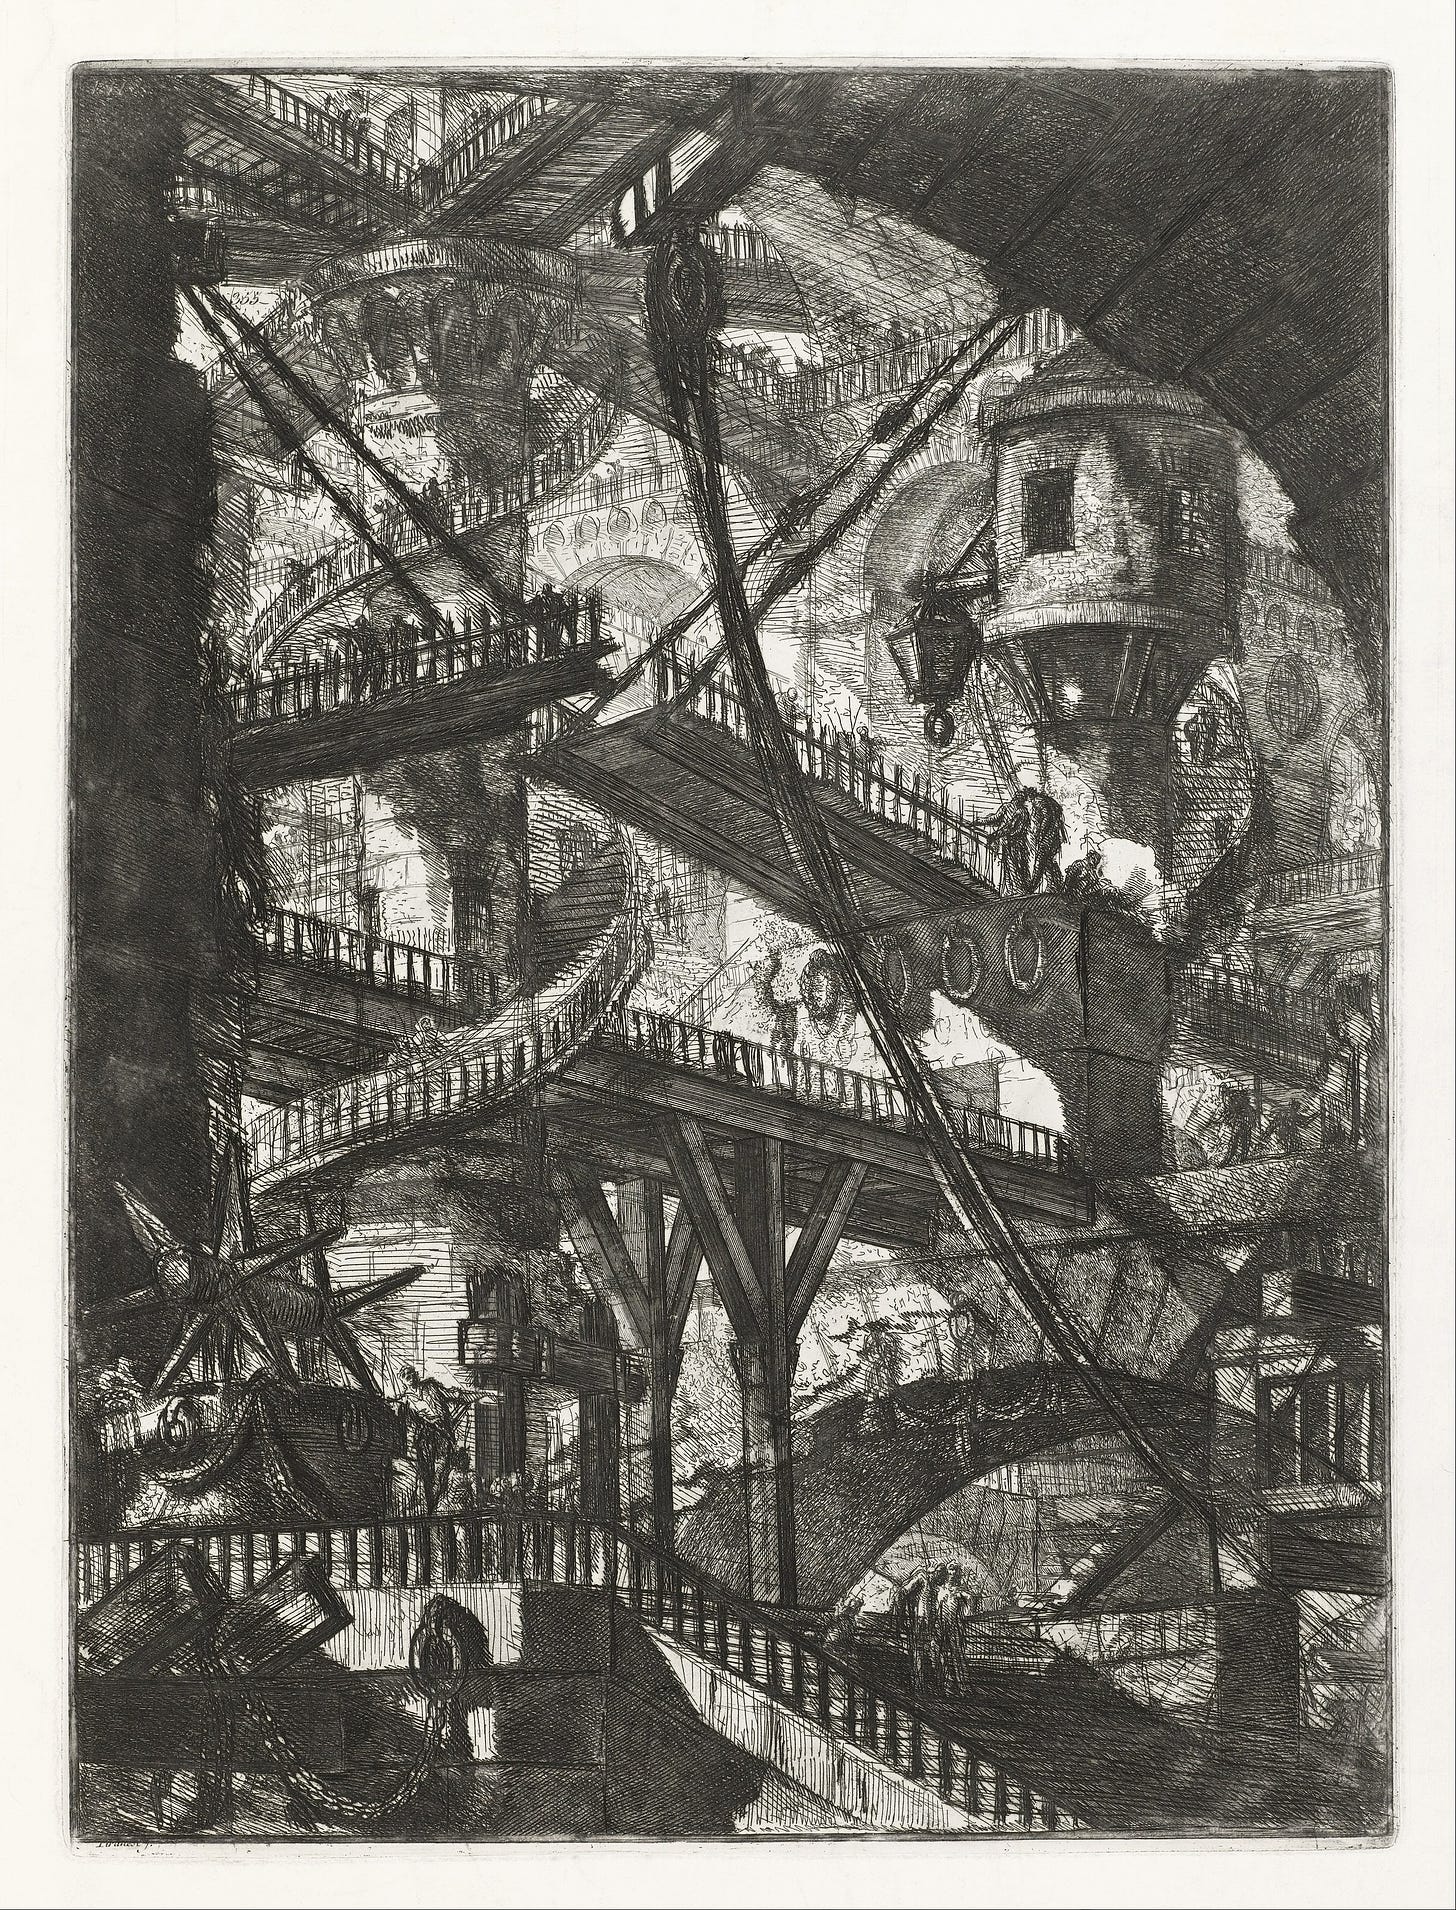 A sketch of labyrinthine staircases from Piranesi's Carceri d'invenzione